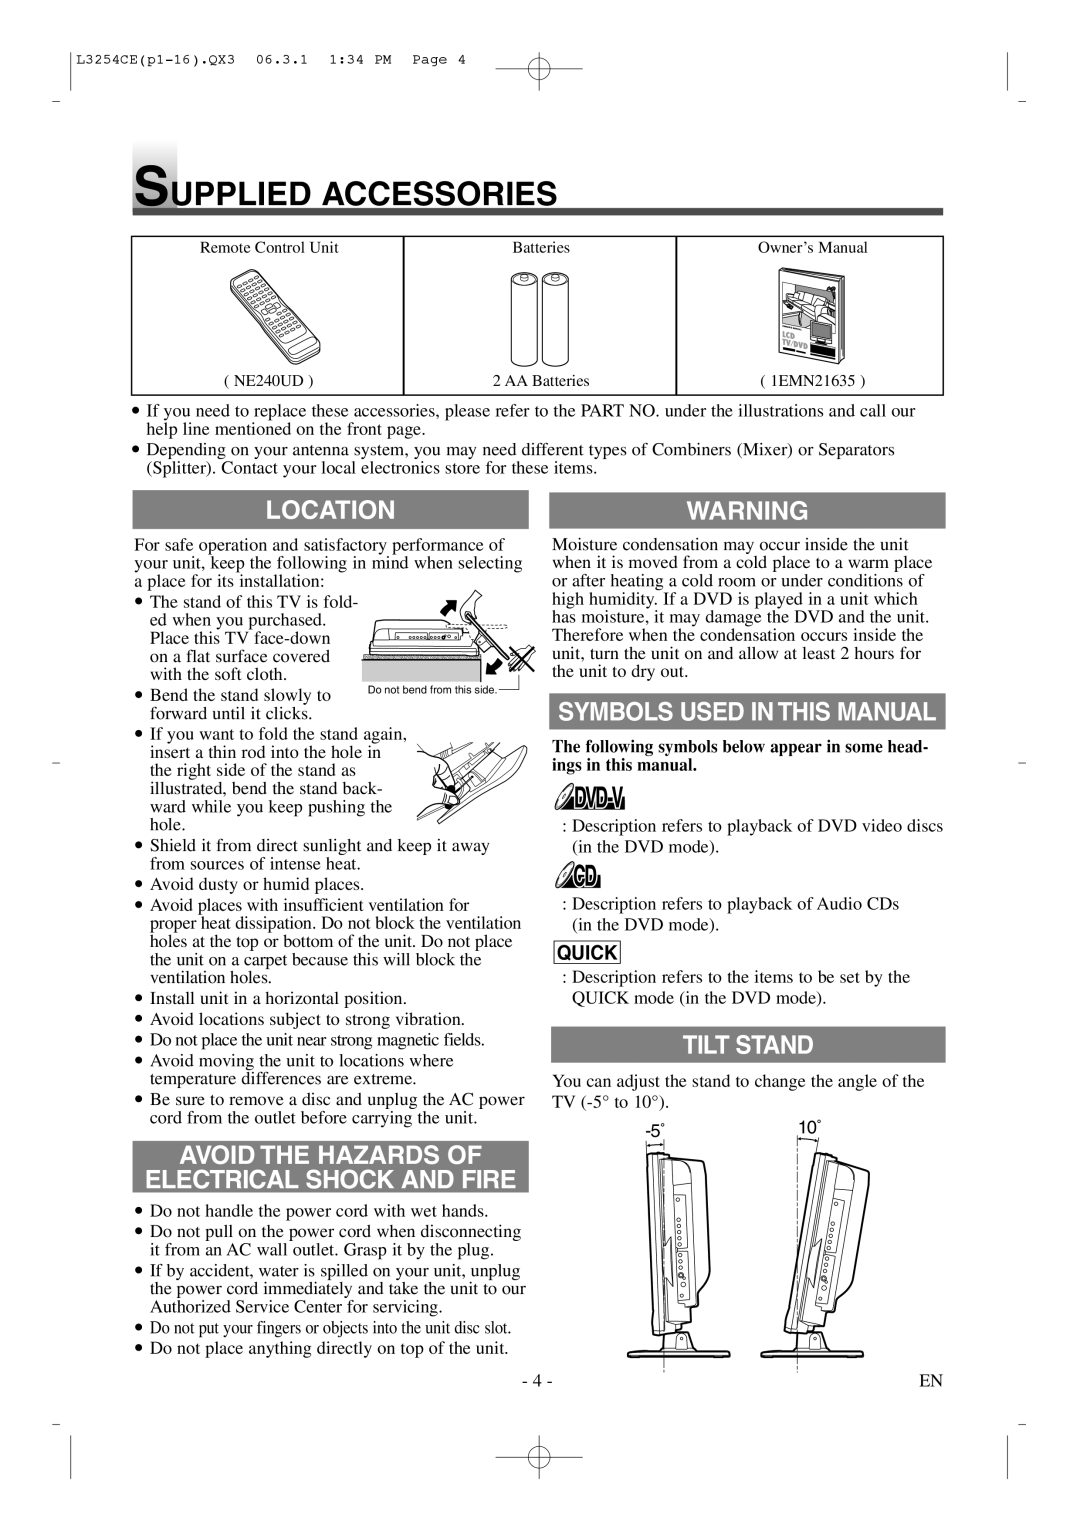 Symphonic LCD TV/DVD owner manual Supplied Accessories, Location, Symbols Used In This Manual, Tilt Stand, Quick 